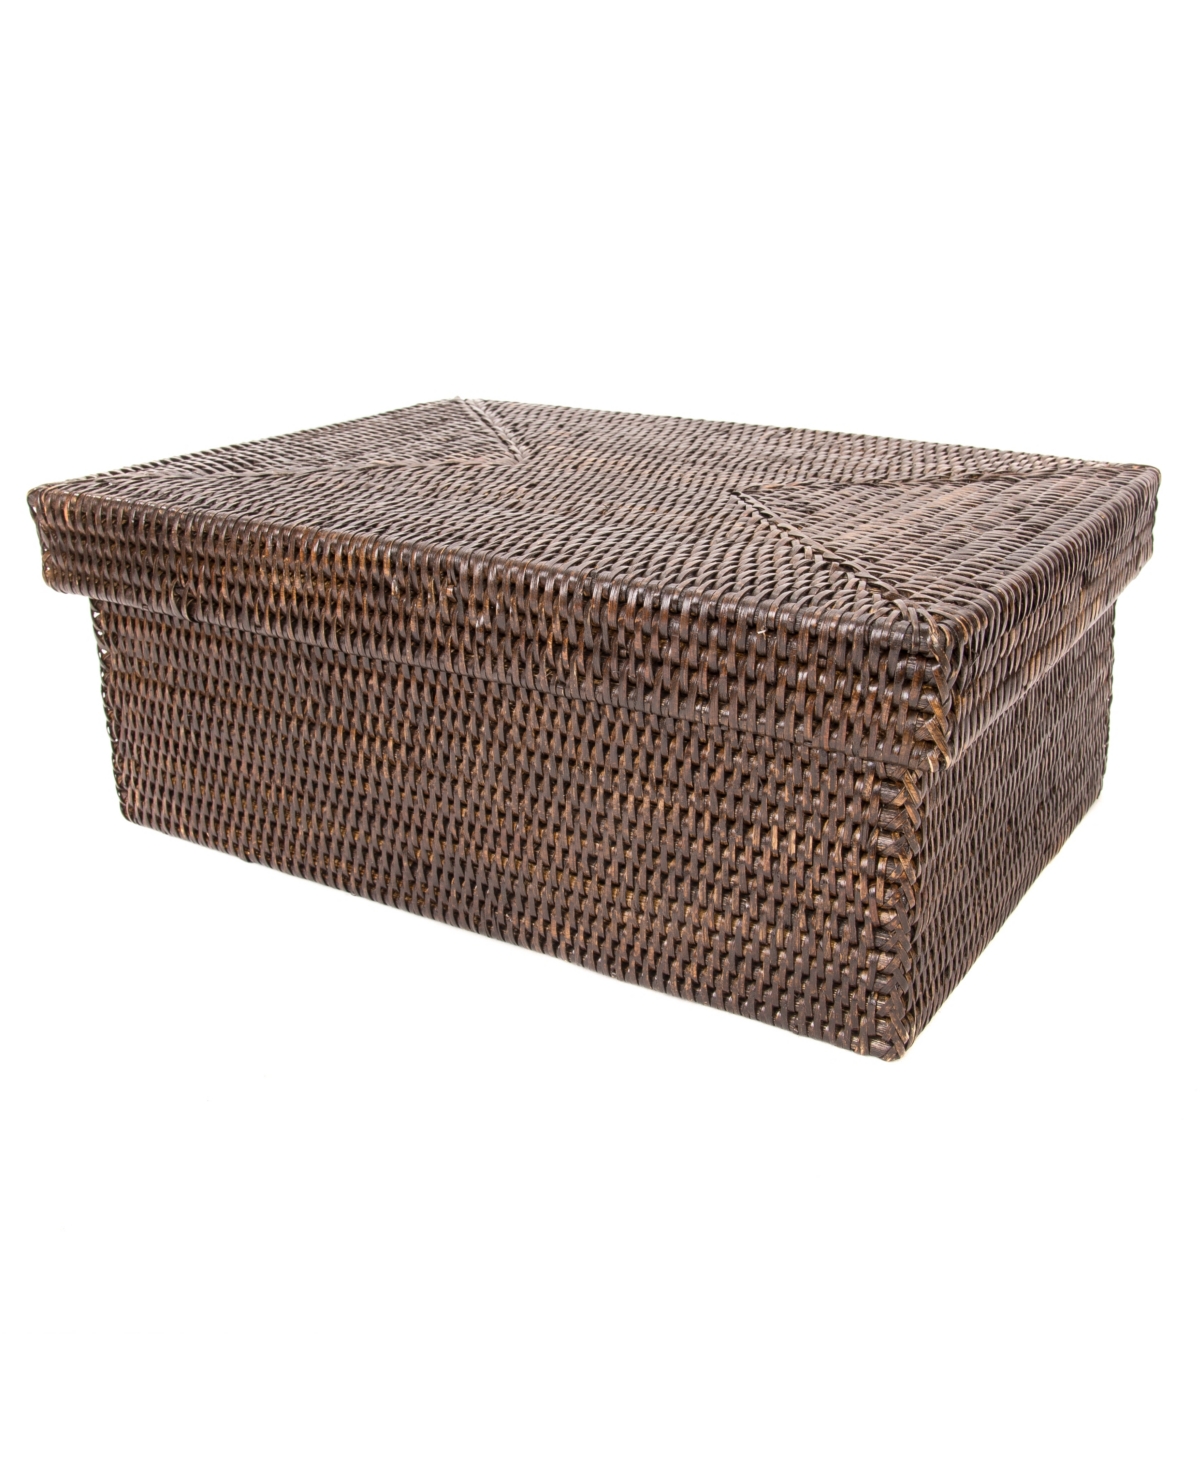 Shop Artifacts Trading Company Artifacts Rattan Rectangular Storage Box With Lid In Coffee Bean